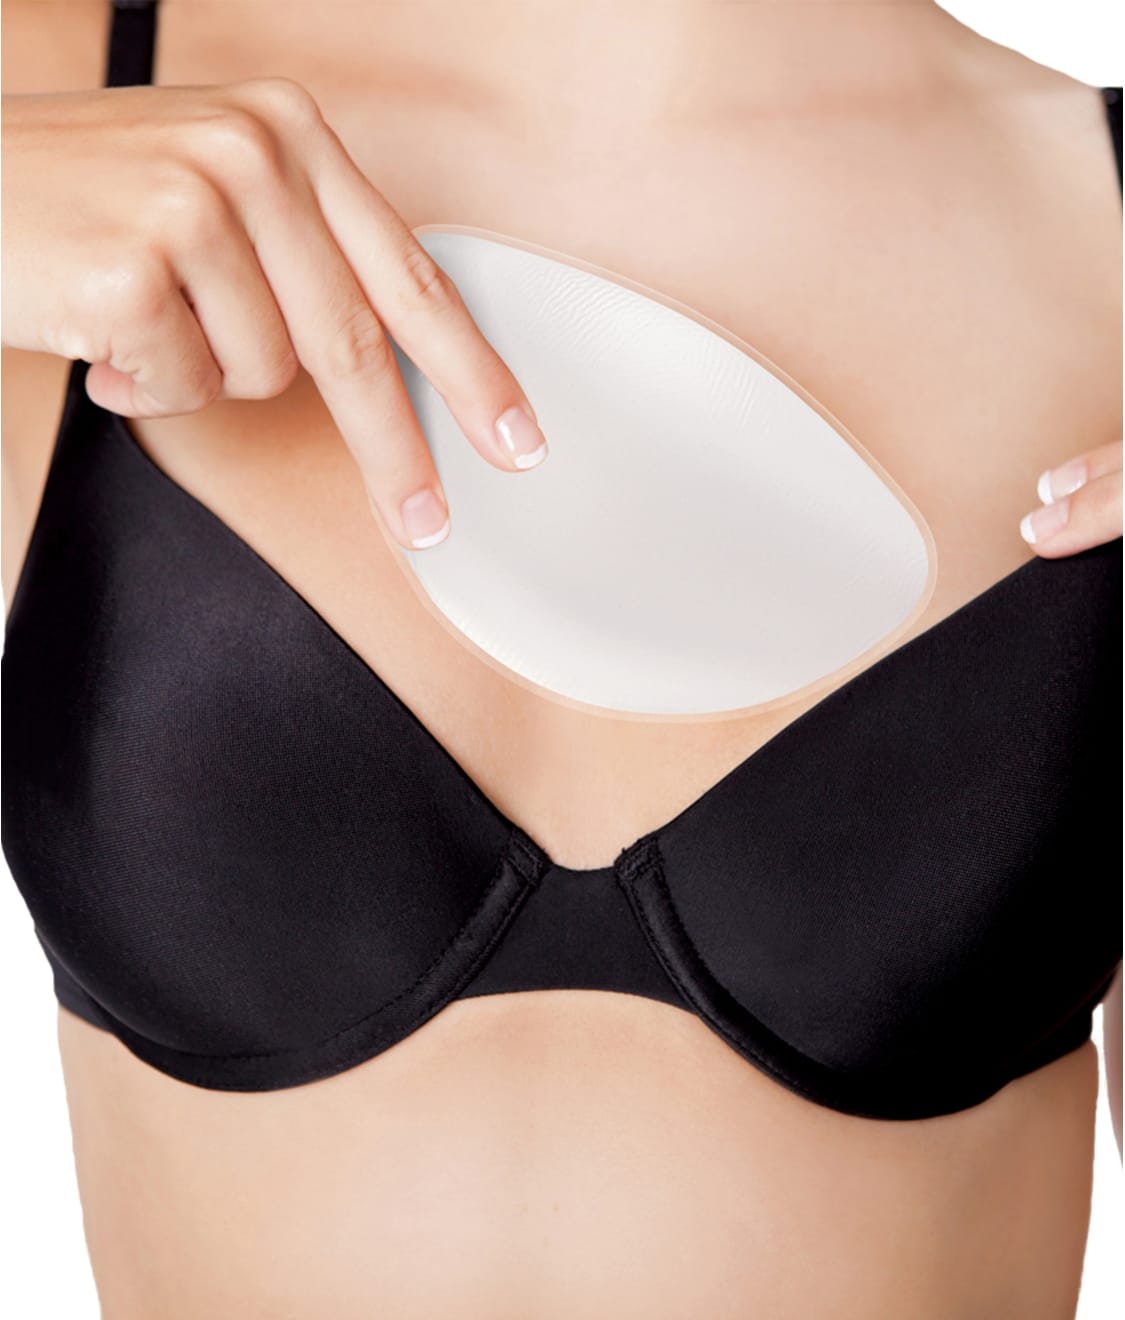 What Are Bra Inserts And Who Are They For? – TomboyX